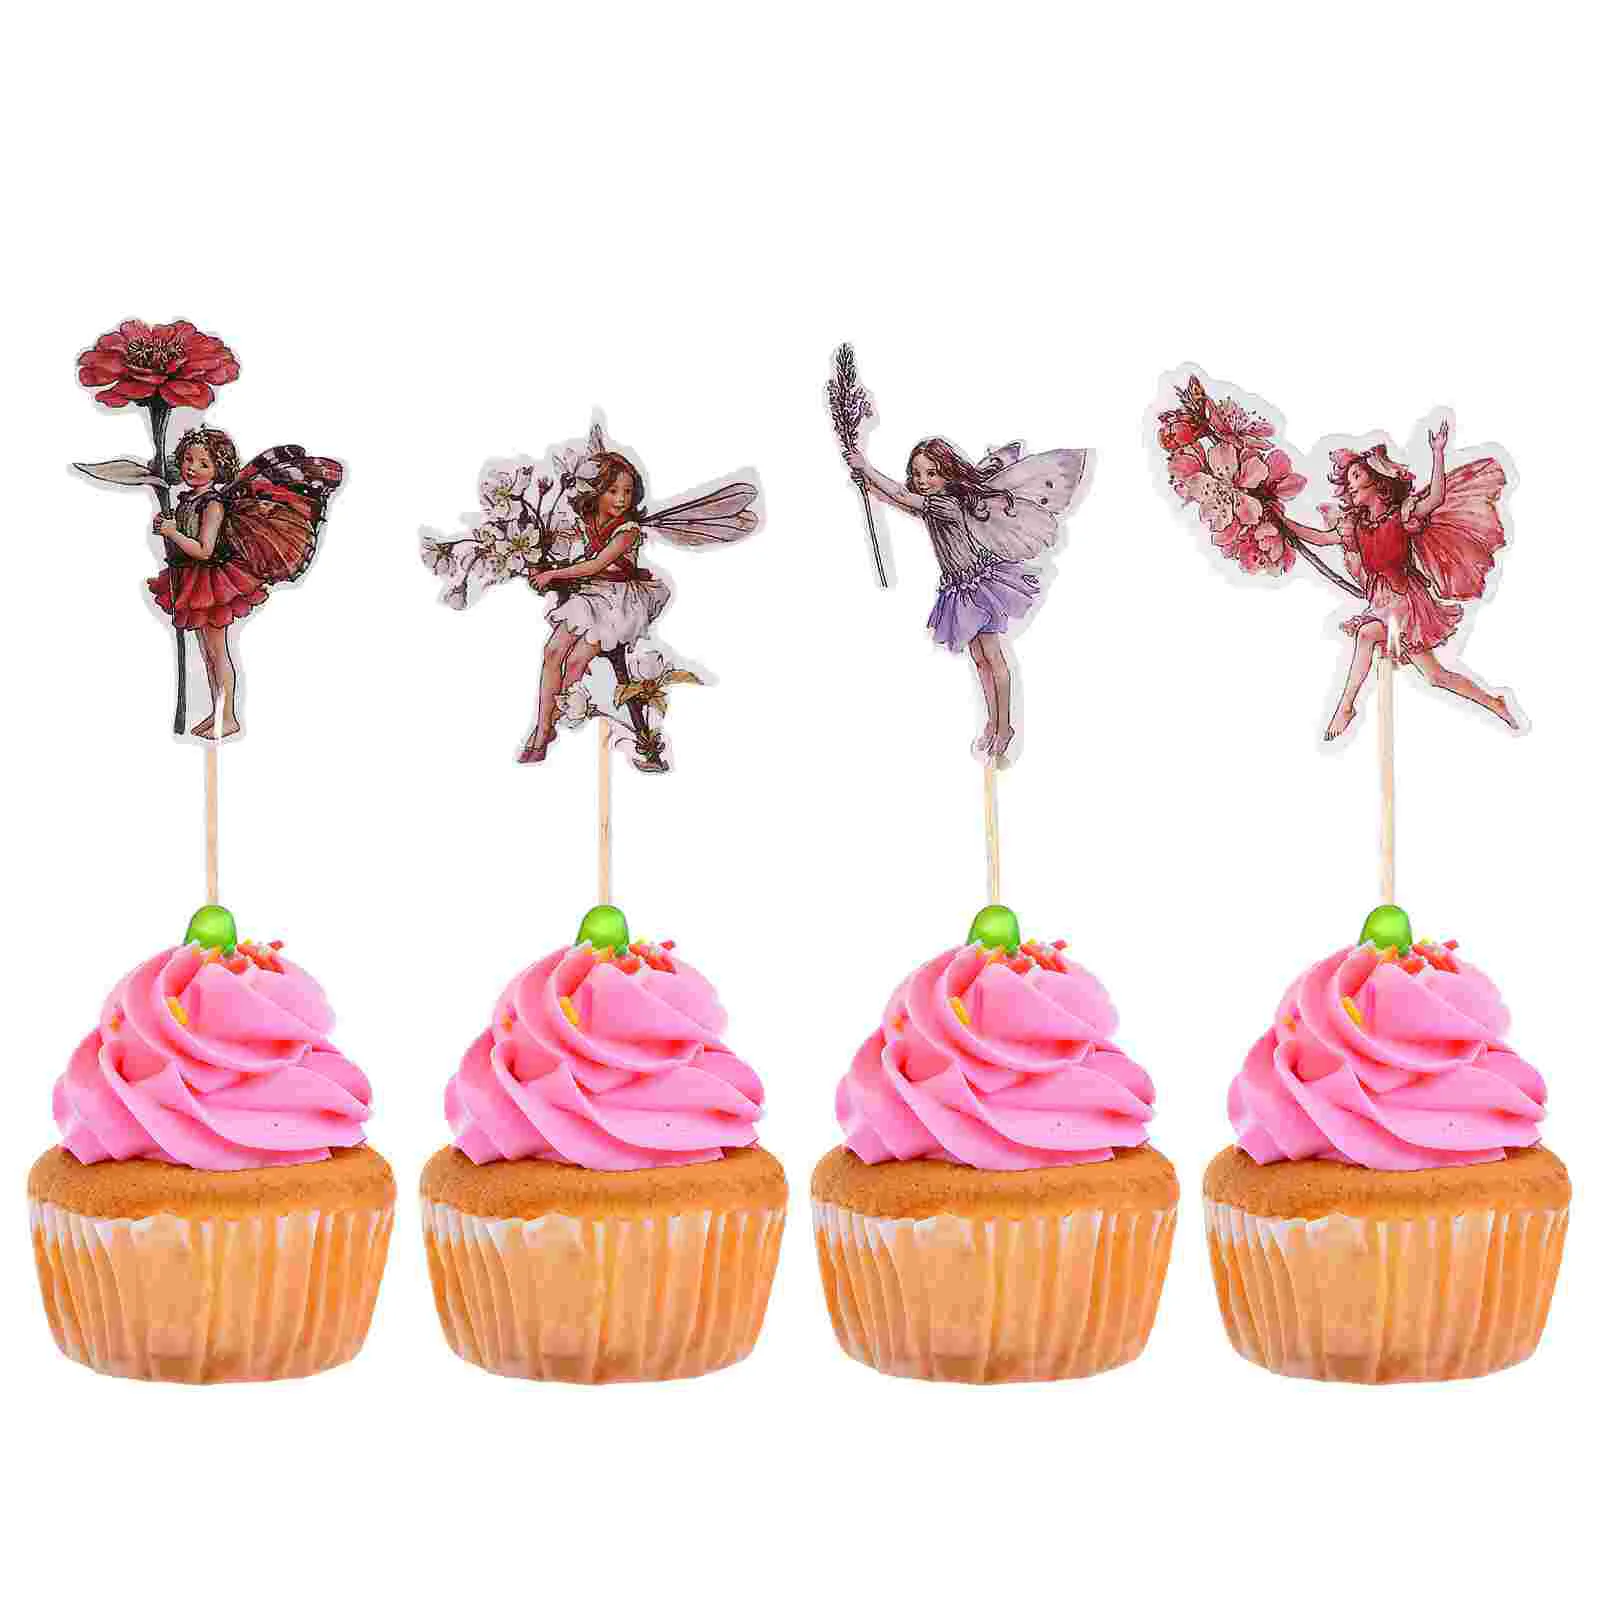 

STOBOK 24pcs Flower Fairy Cake Toppers Creative Cake Picks Cupcake Toppers Ornaments Dessert Decorations